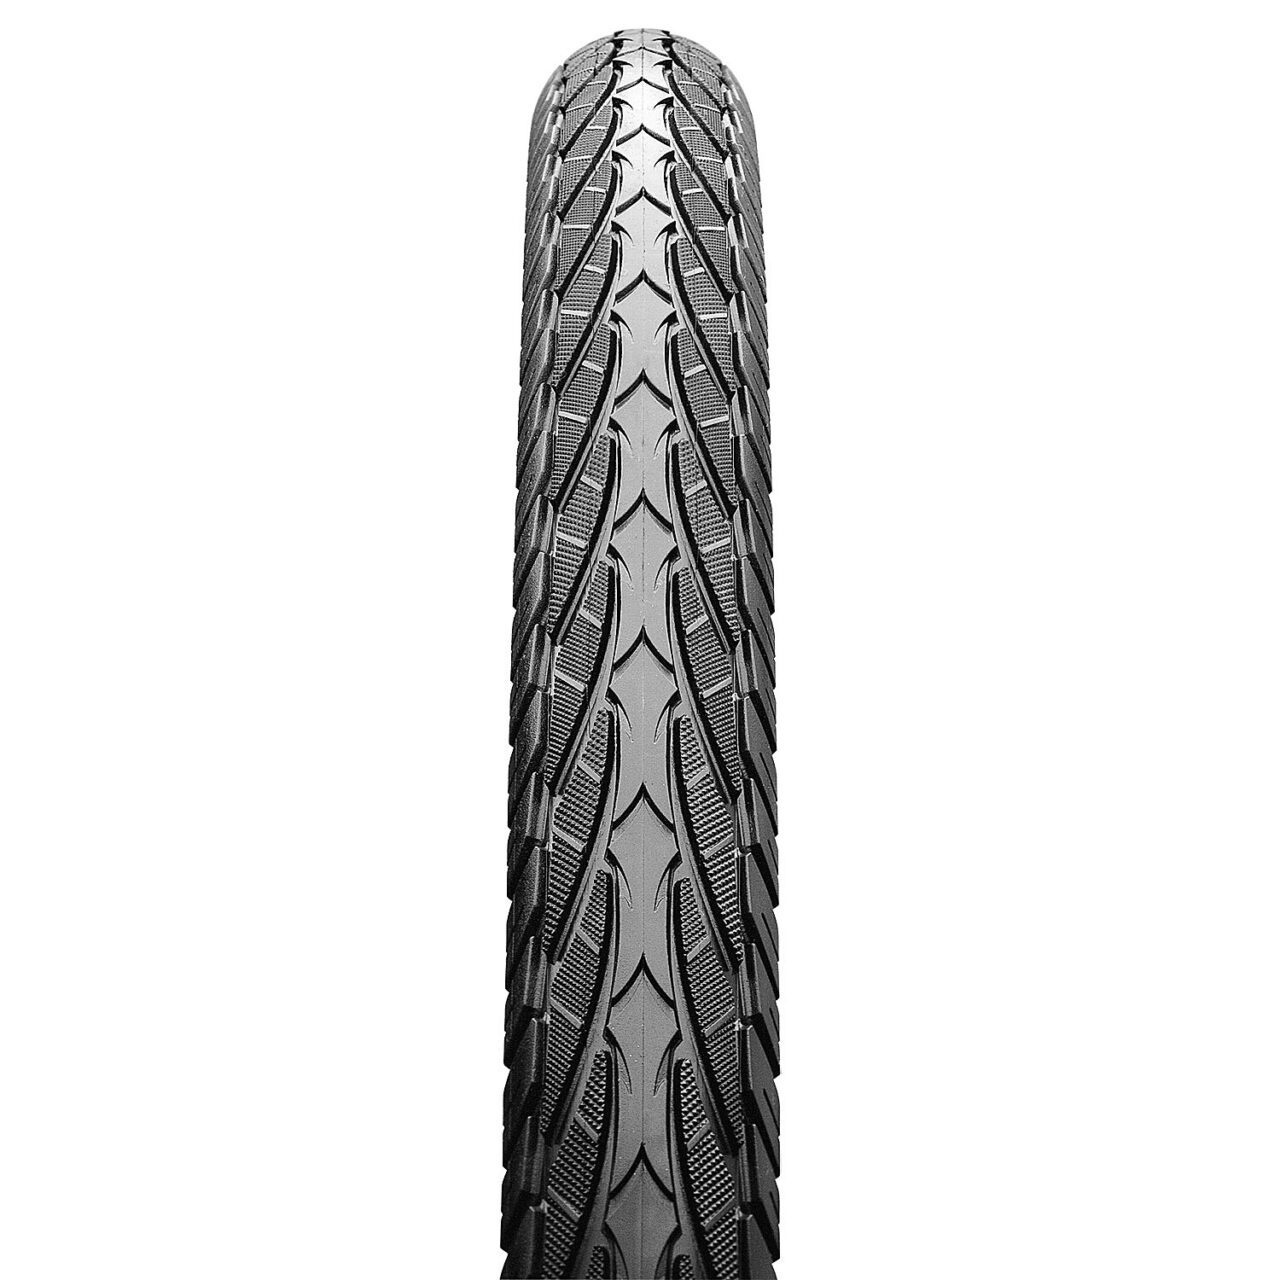 MAXXIS Maxxis Hybrid Overdrive Tires 700x 38C W60 TPI SC K2